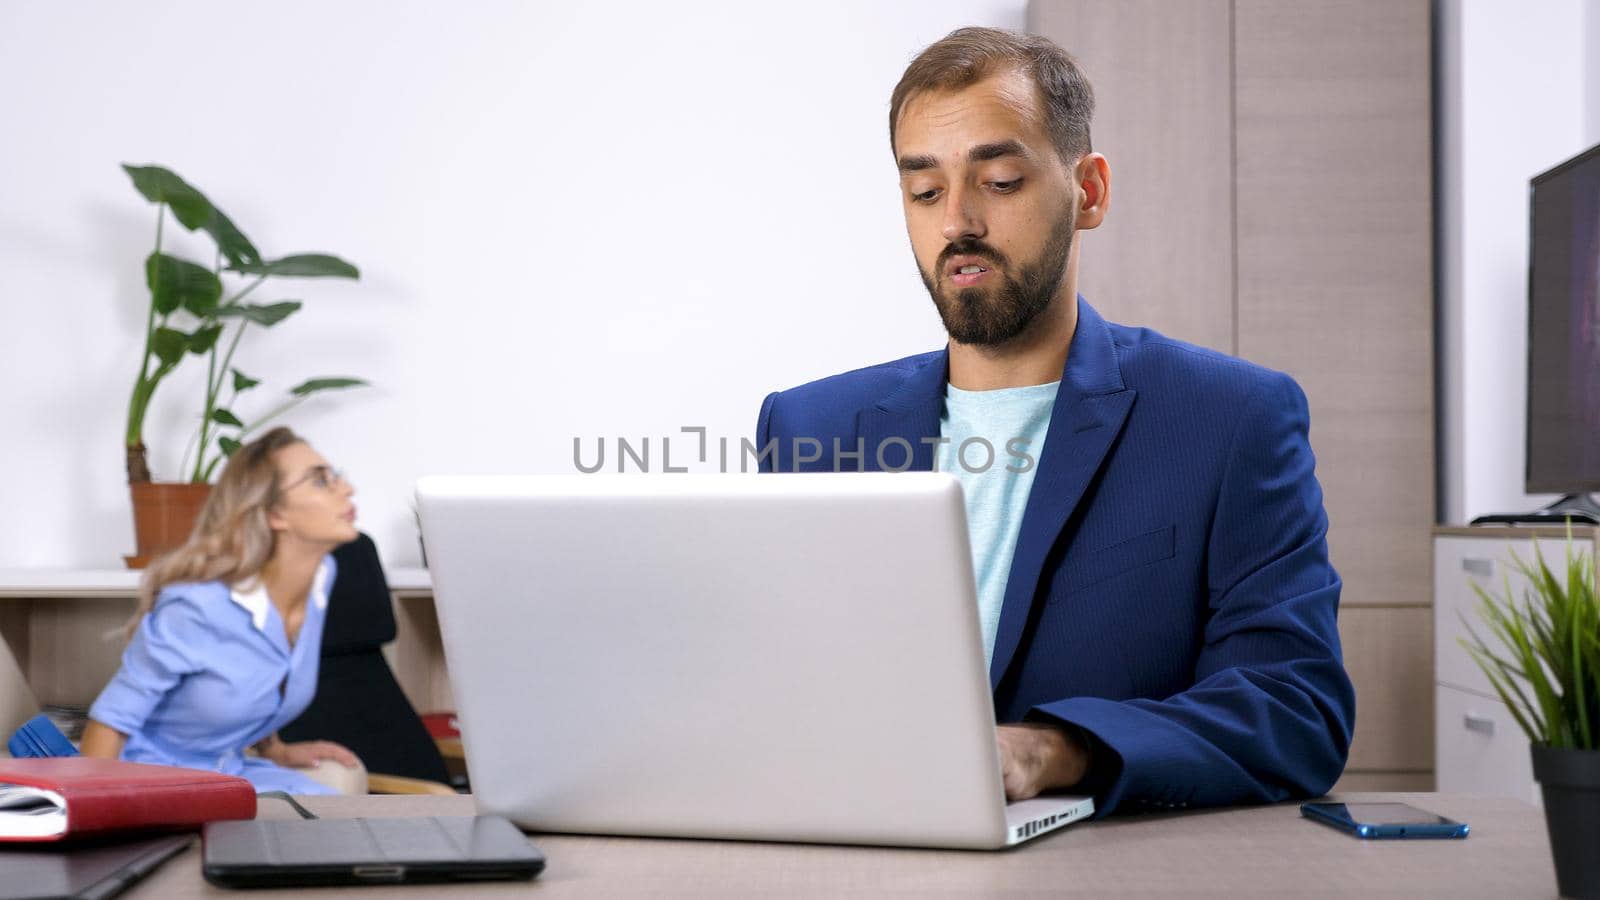 Freelancer businessman working on the laptop computer in the house and his wife is in the background